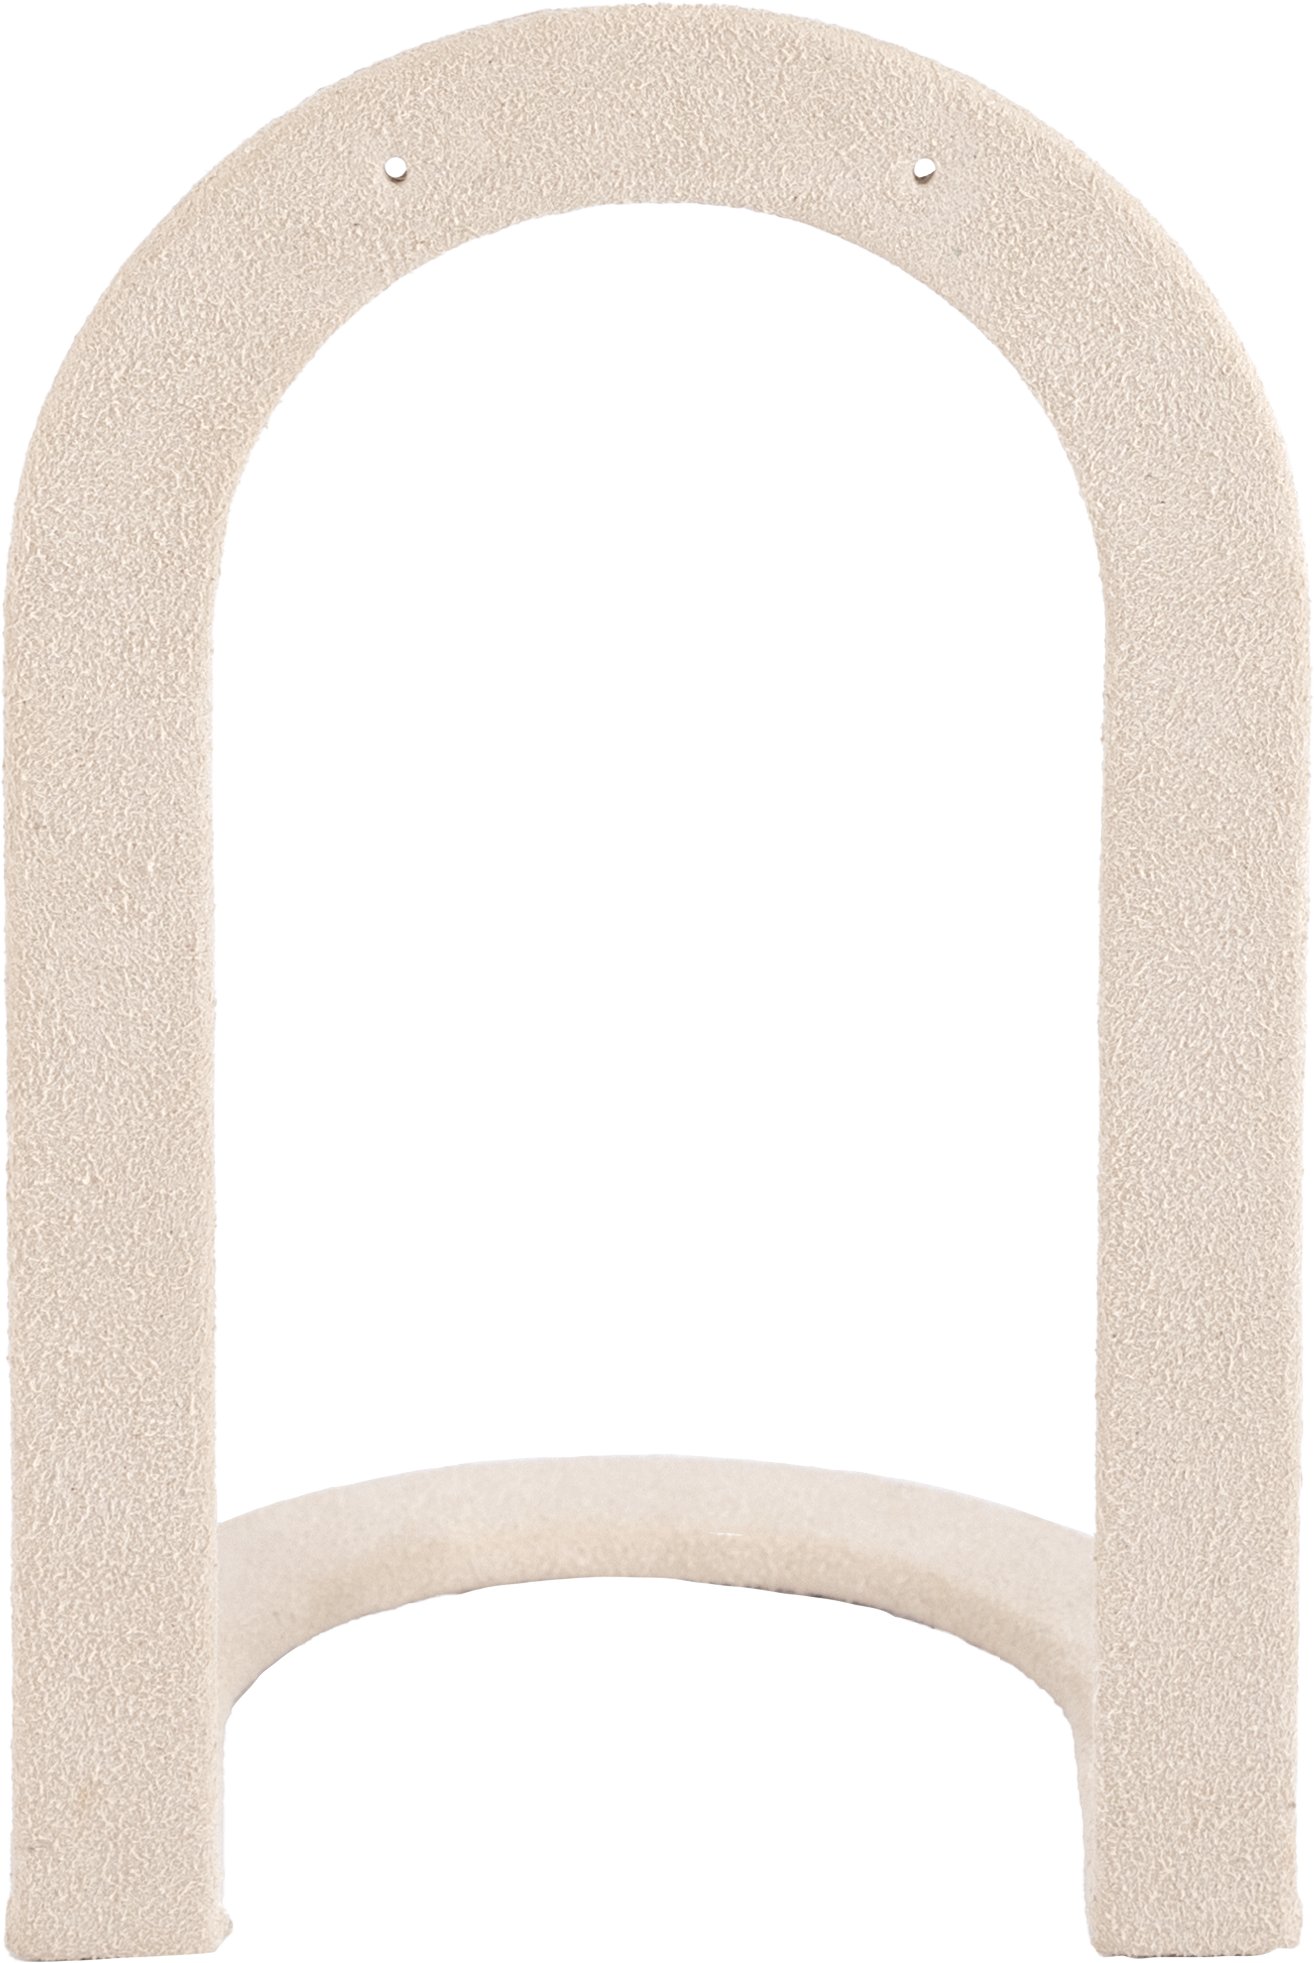 Ivory Matte Suede Earring Stand